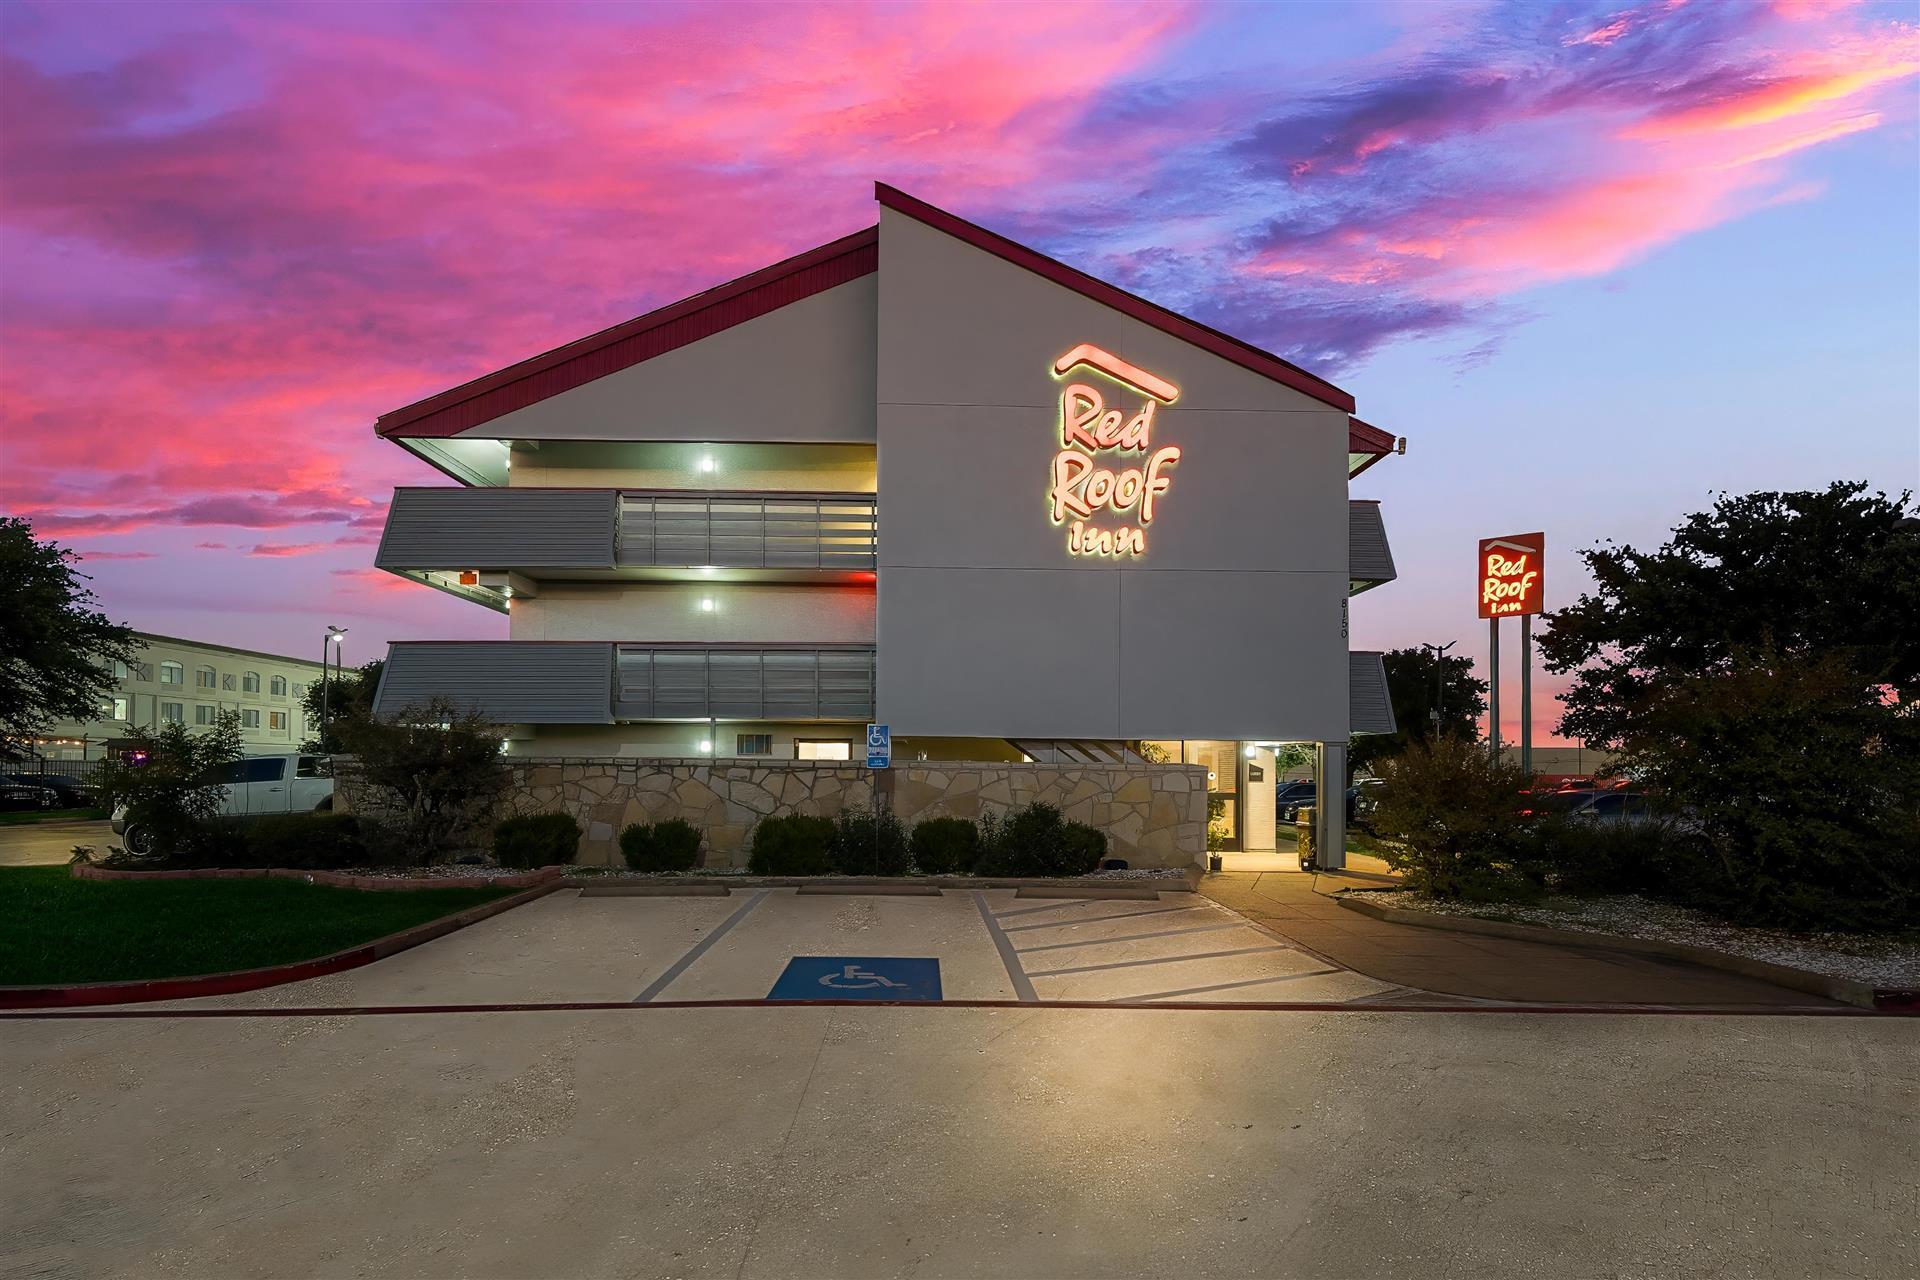 Red Roof Inn Dallas - DFW Airport North in Irving, TX